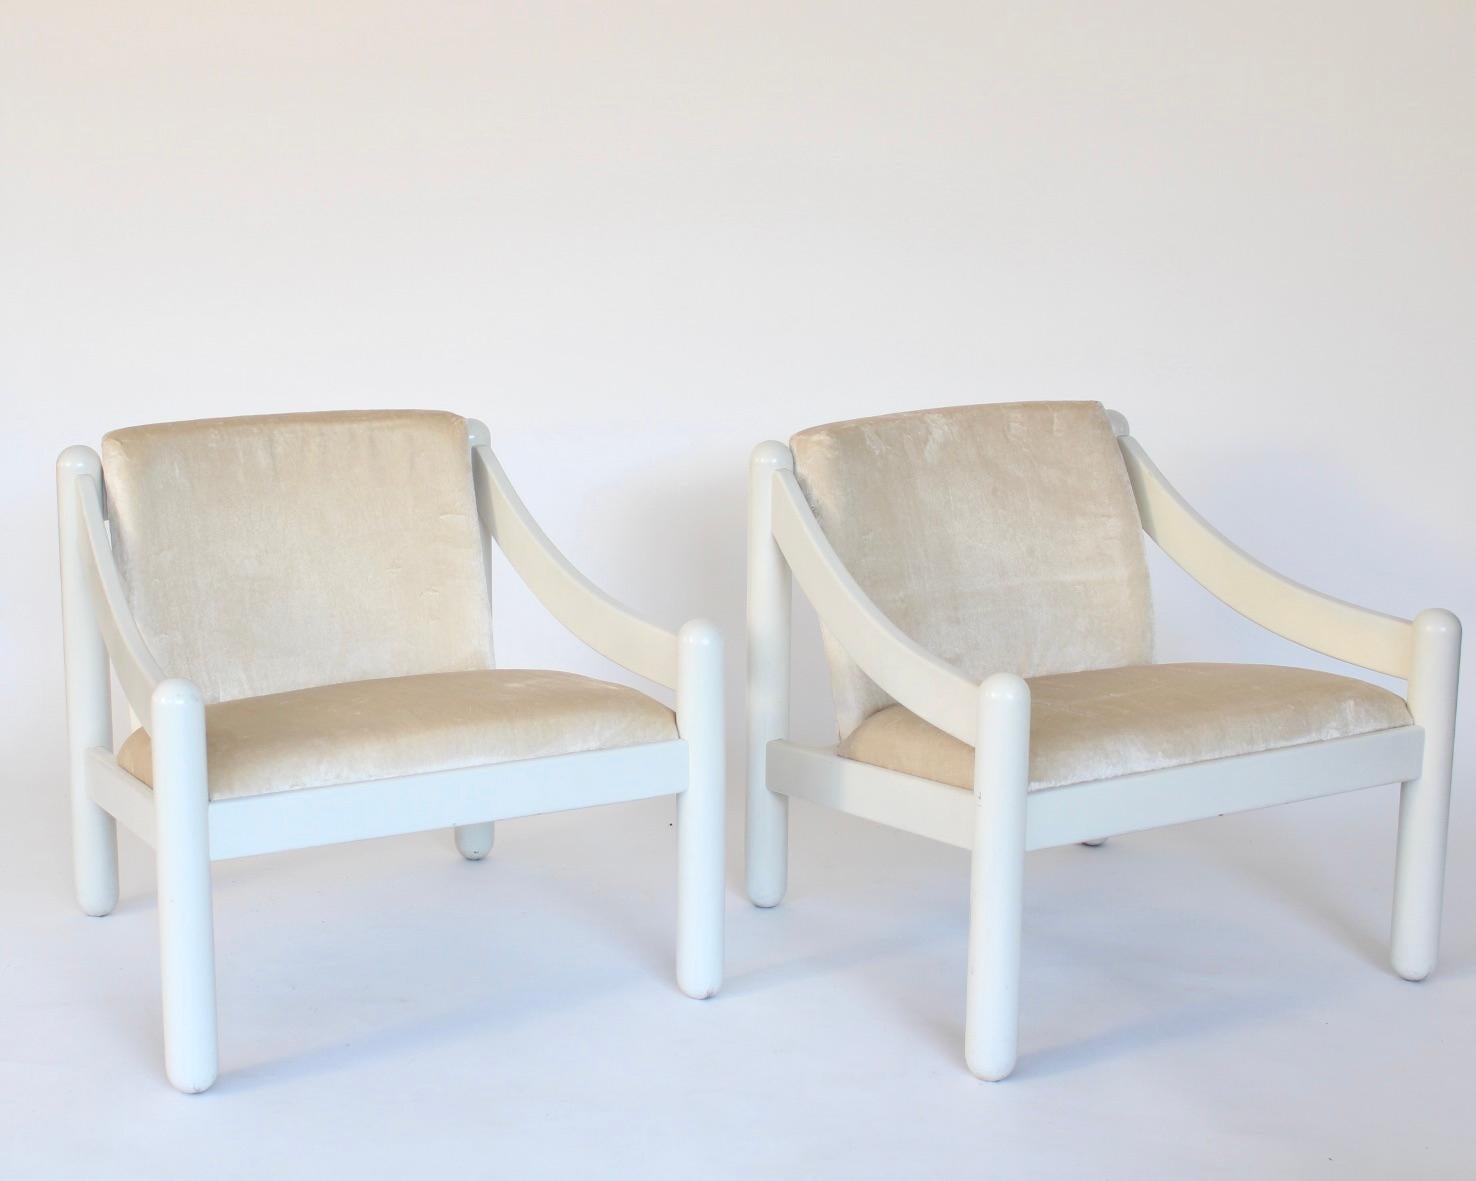 Vico Magistretti for Cassina, pair of the Carimate lounge chairs, in a rare white lacquered beech wood with new warm tone cream velvet, Italy, designed circa 1960  The Carimate lounge chair is one of Vico Magistretti’s most famous chairs.